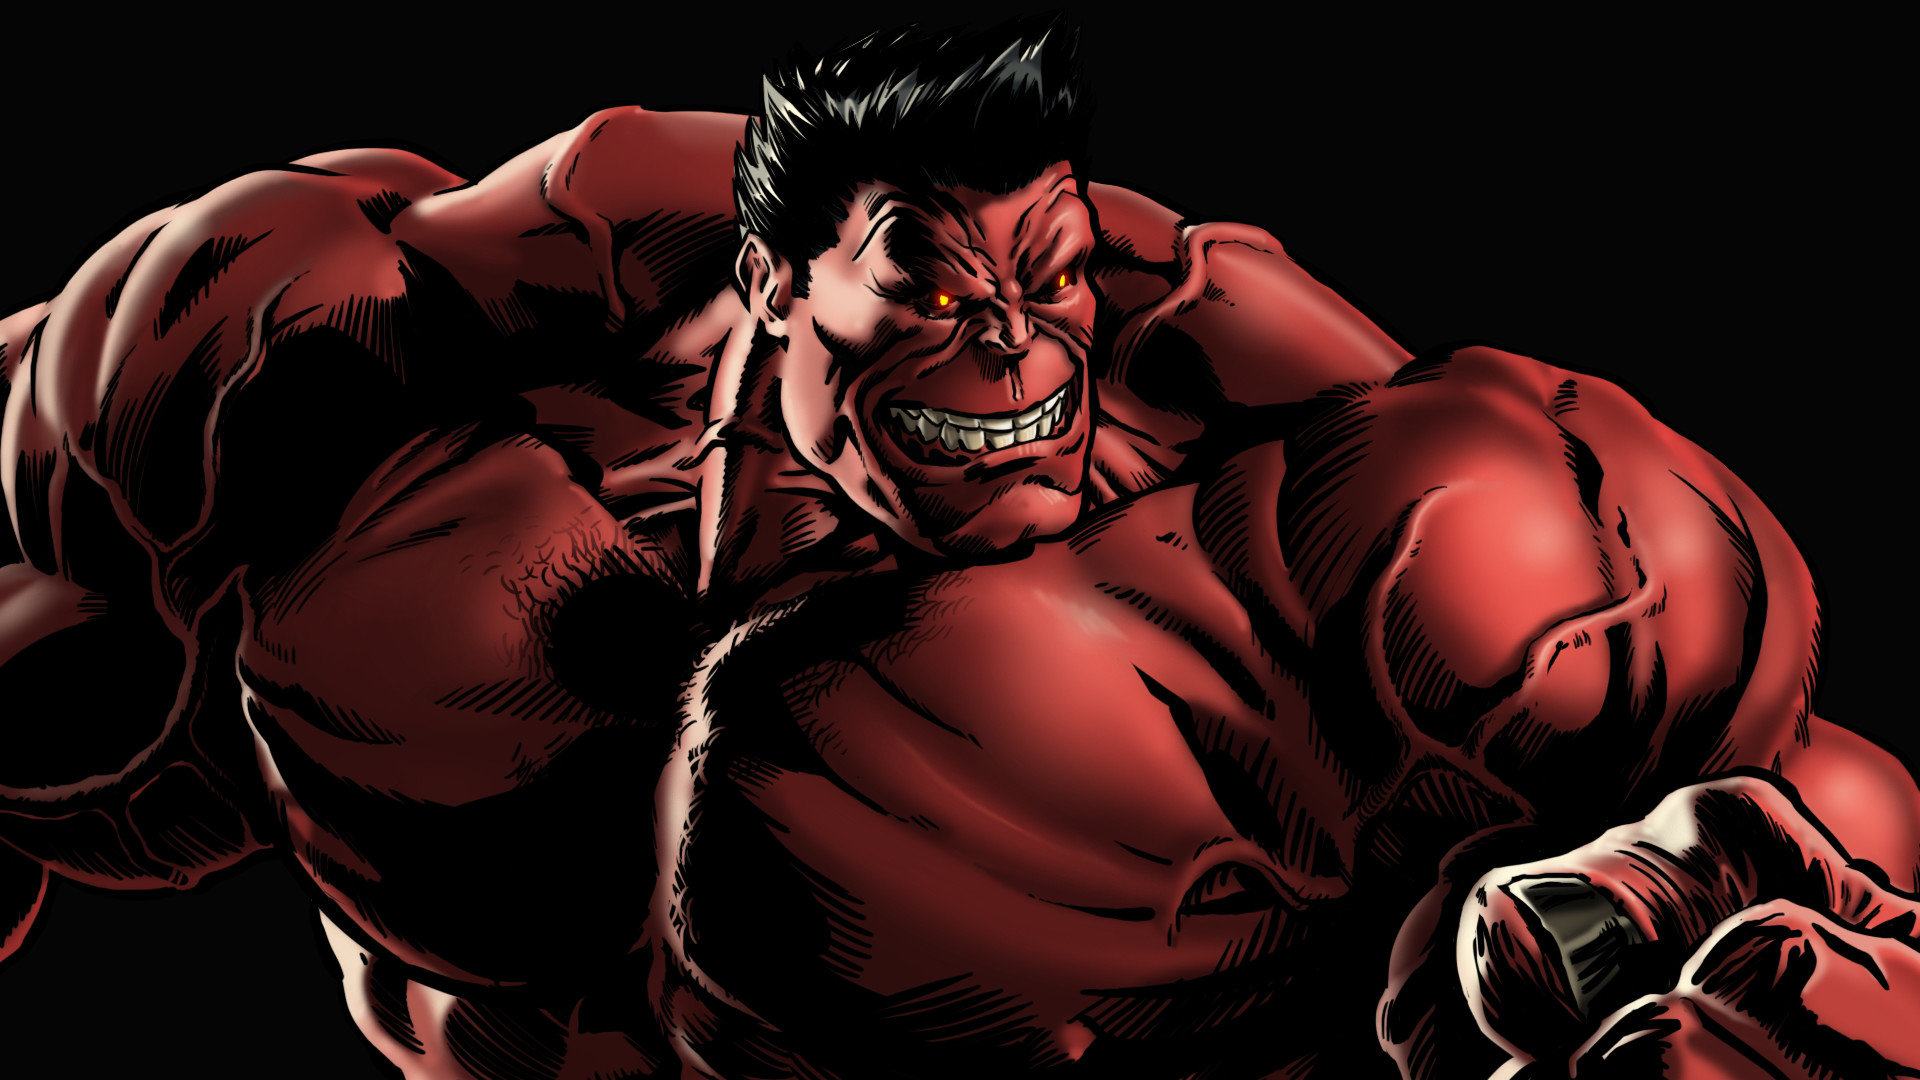 Download full hd 1920x1080 Red Hulk desktop background ID:40596 for free